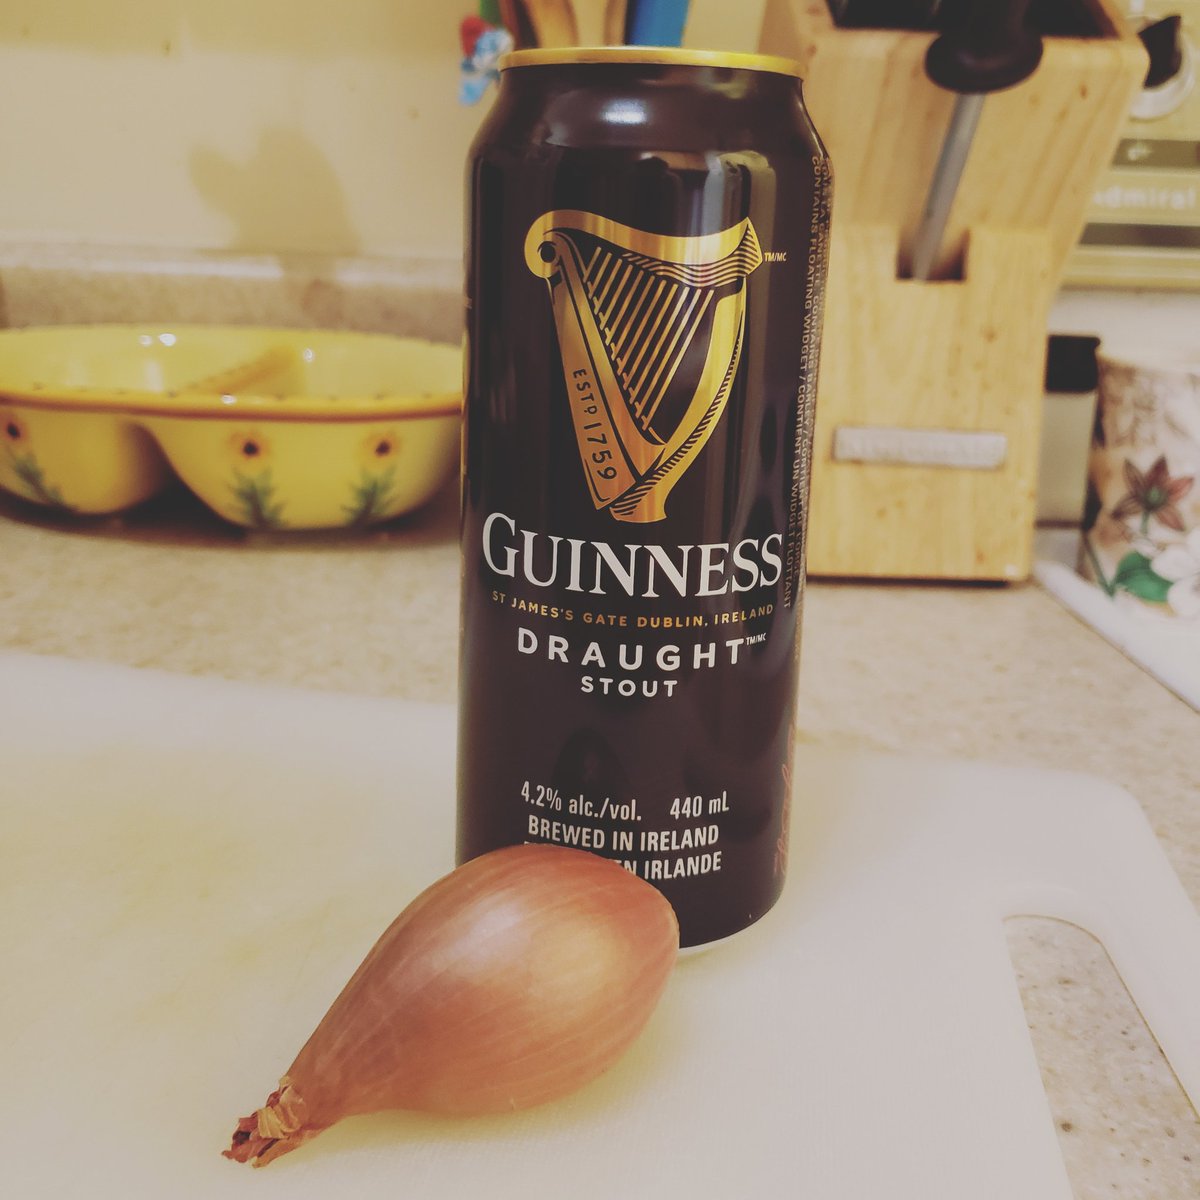 Love my neighbour! Just traded a Guinness for a shallot! Which meant I didn't have to go out AGAIN and brave the stores! (I got the shallot and still have a Guinness left) #loveyourneighbor #communitylove #communityrocks #guinessbeer